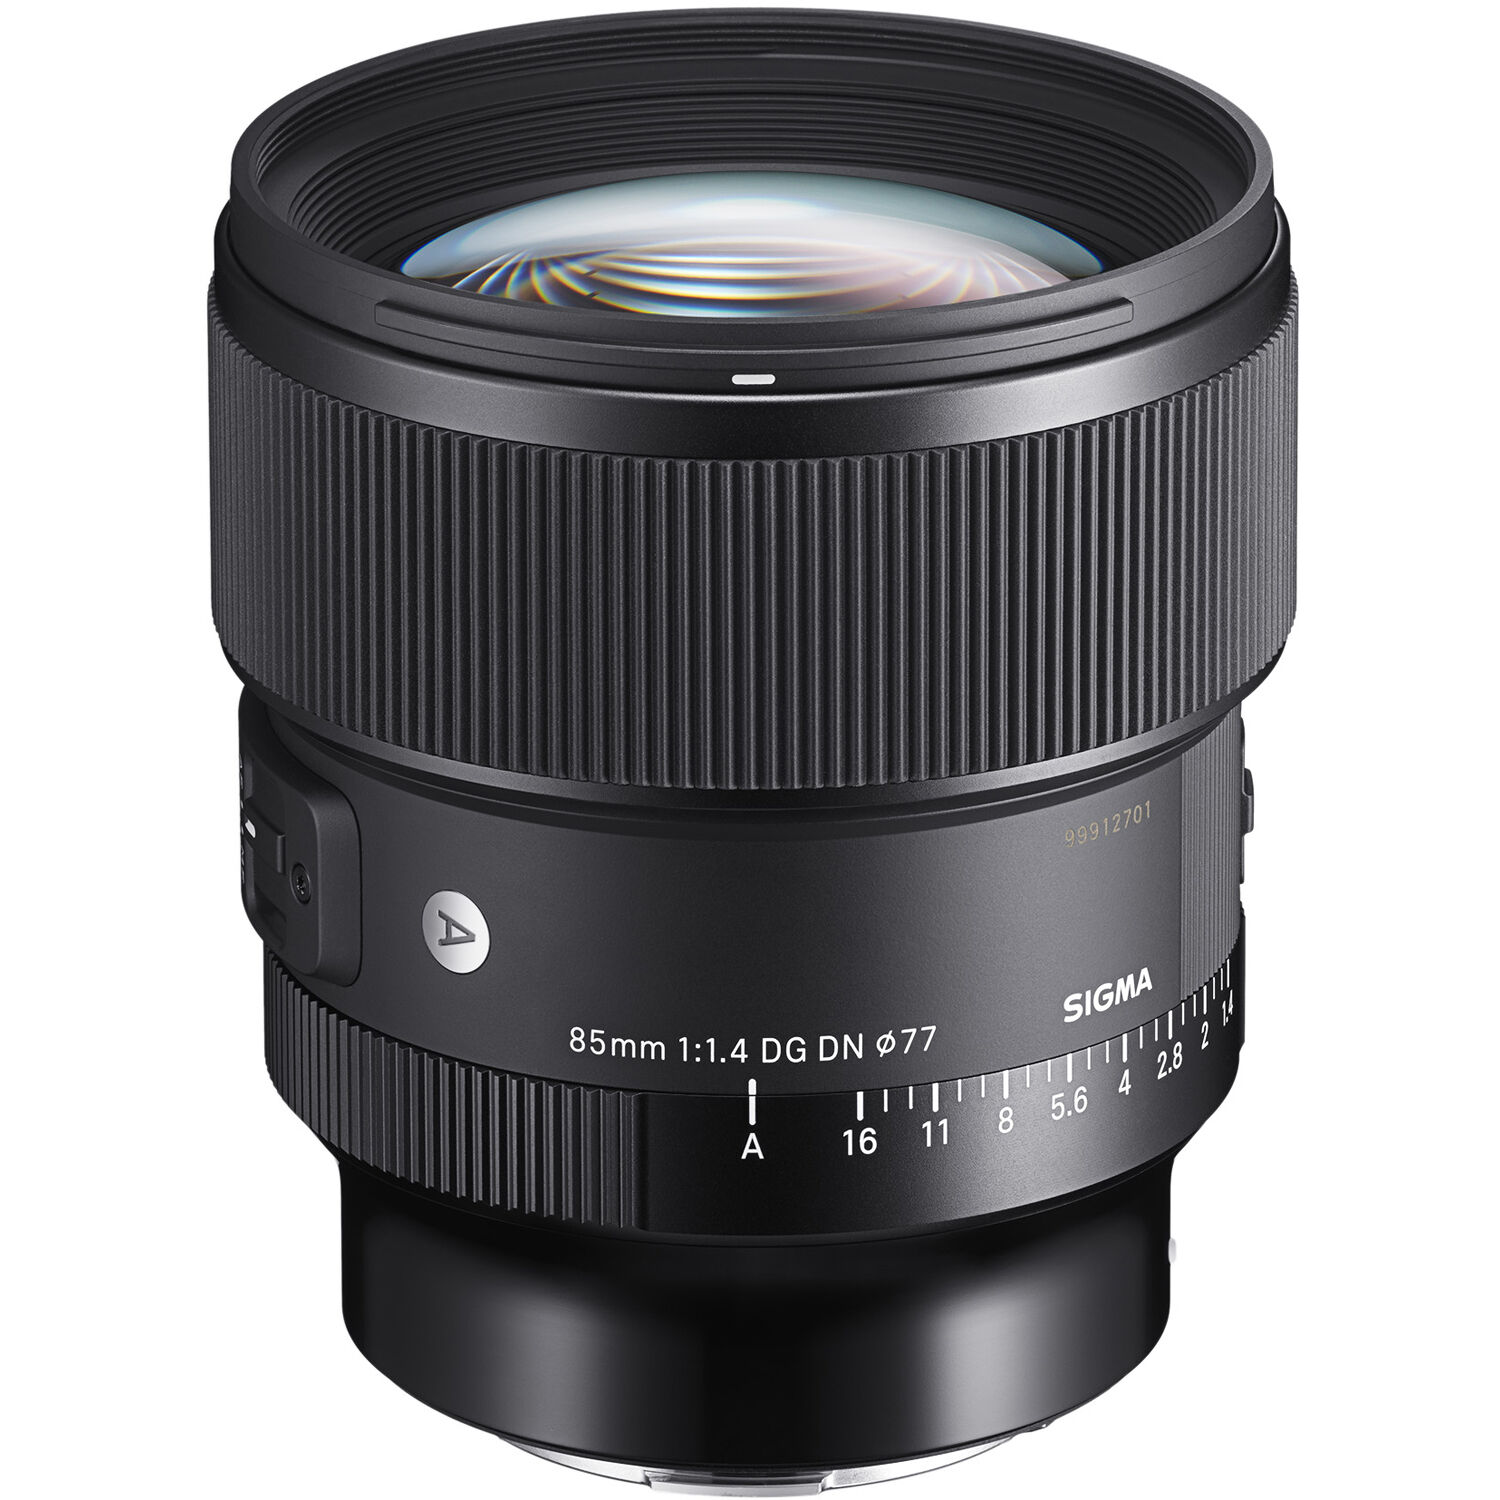 Sigma 85mm f/1.4 DG DN is an Art-series prime characterized by its advanced and updated optical design